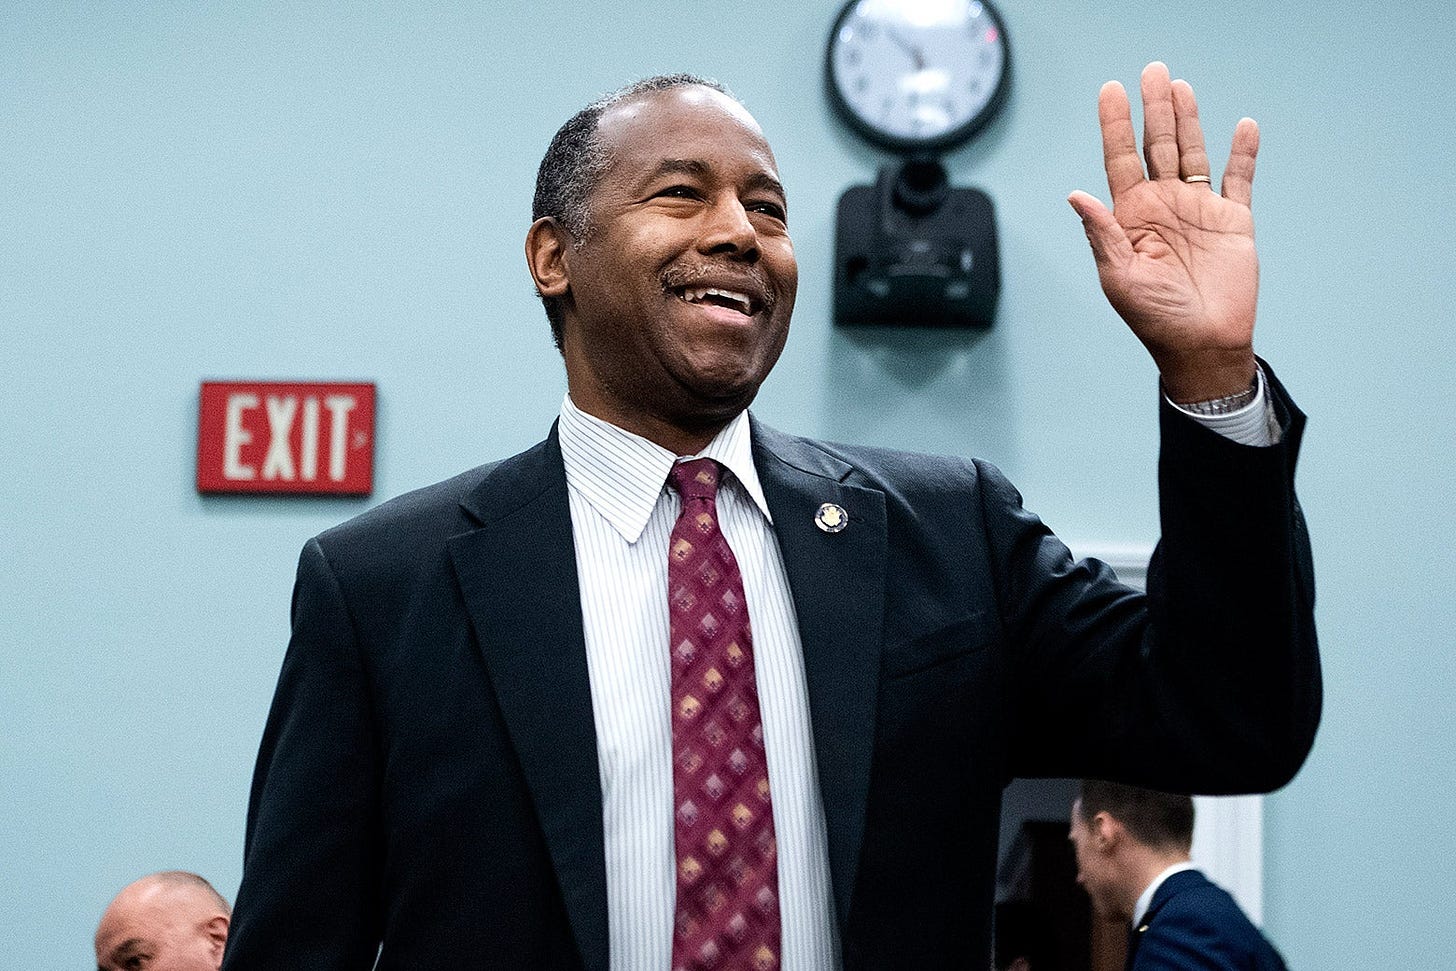 Ben Carson, you ruined your legacy. Goodbye.